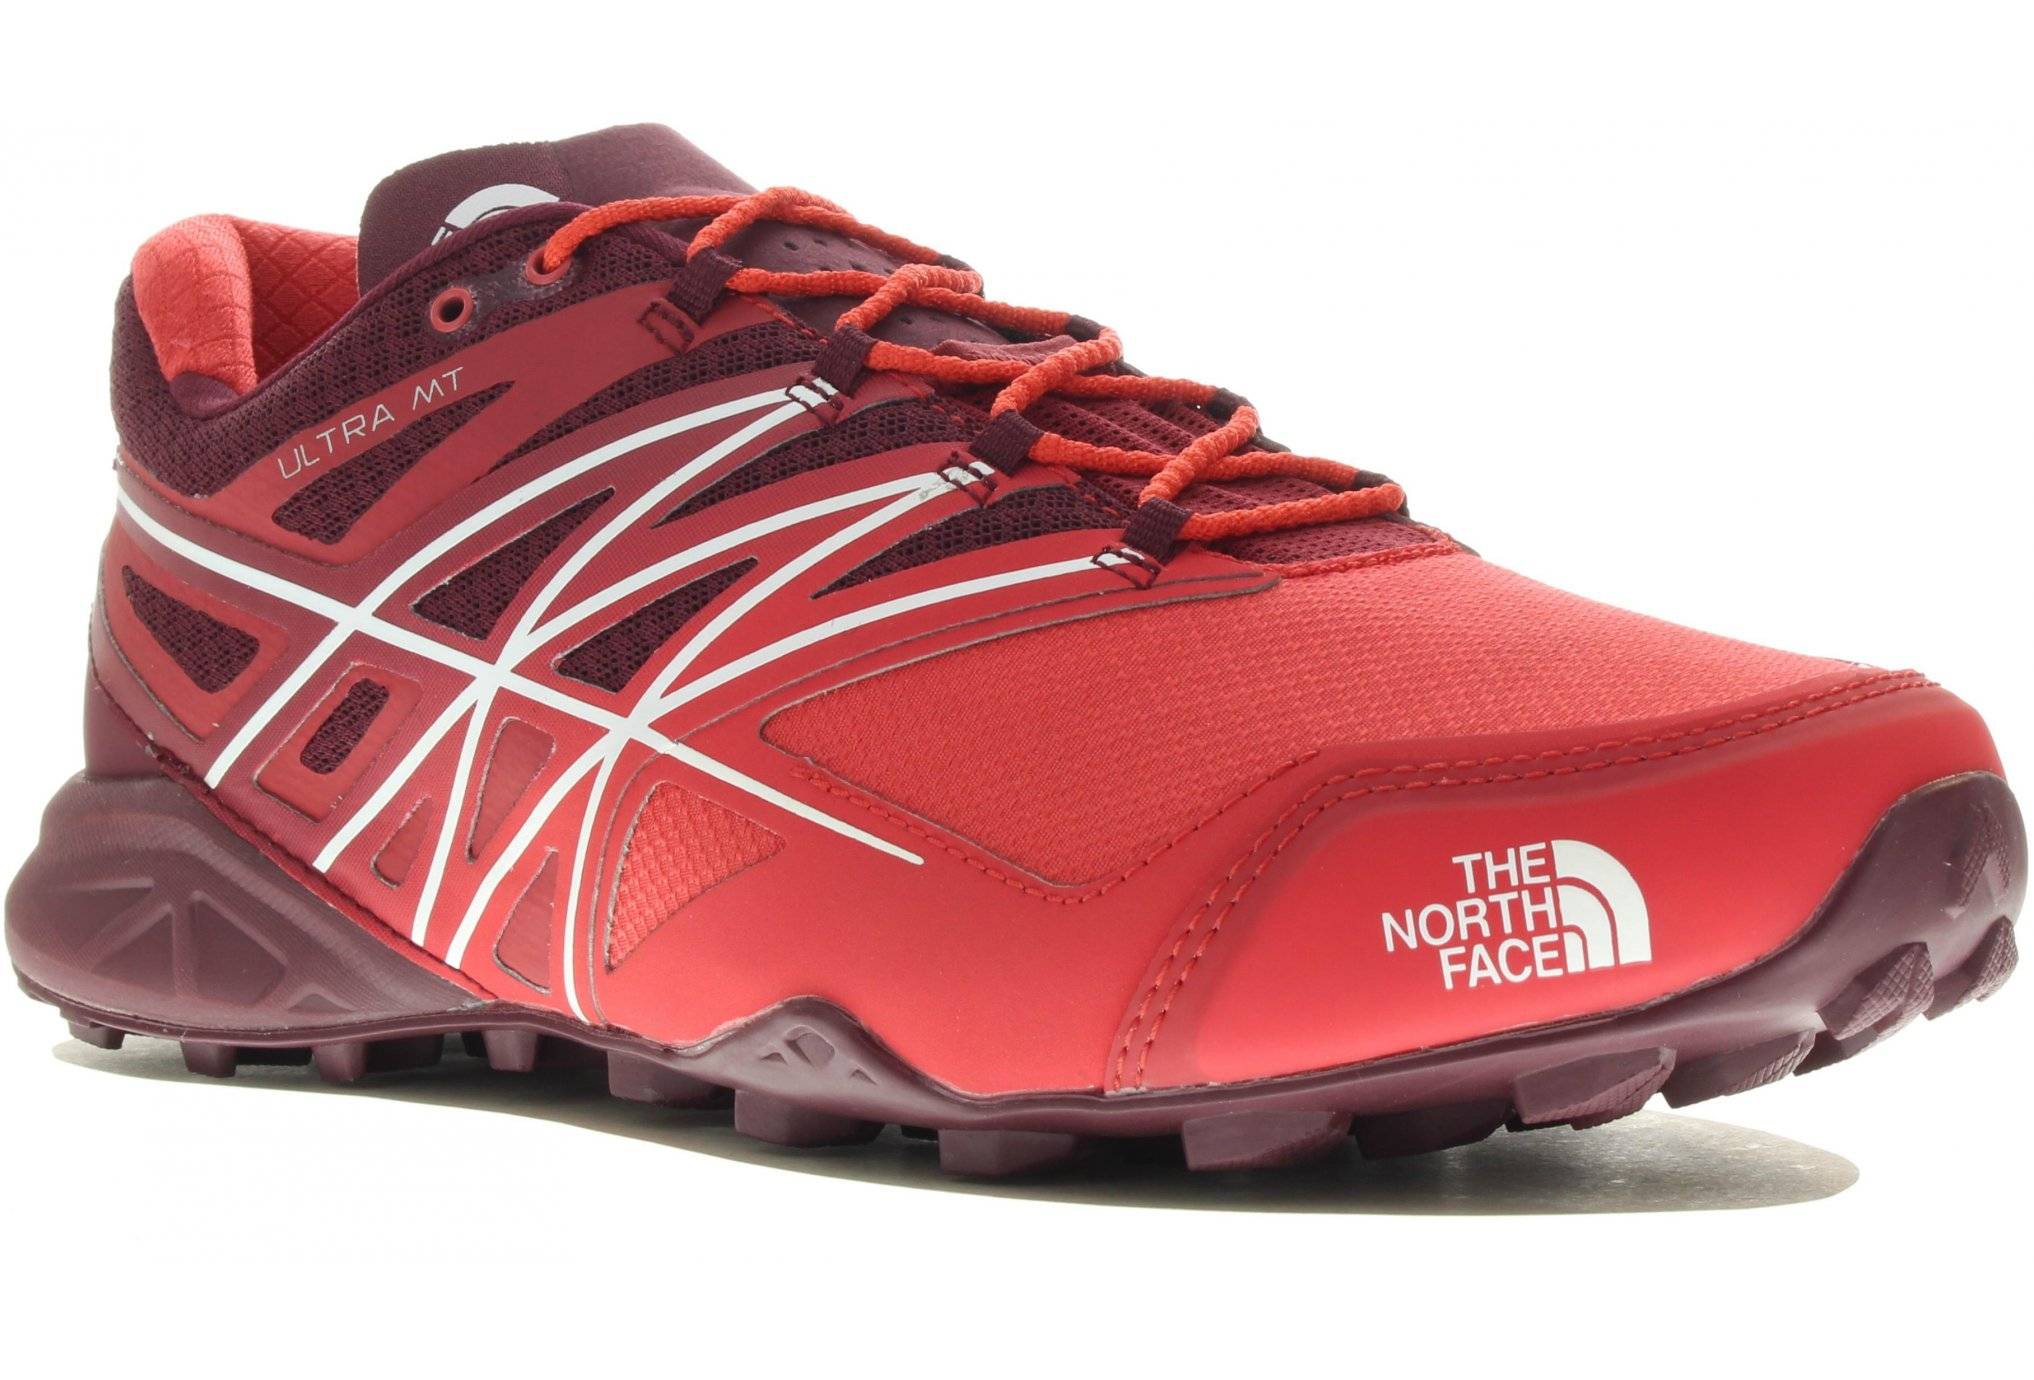 The North Face Ultra MT W 